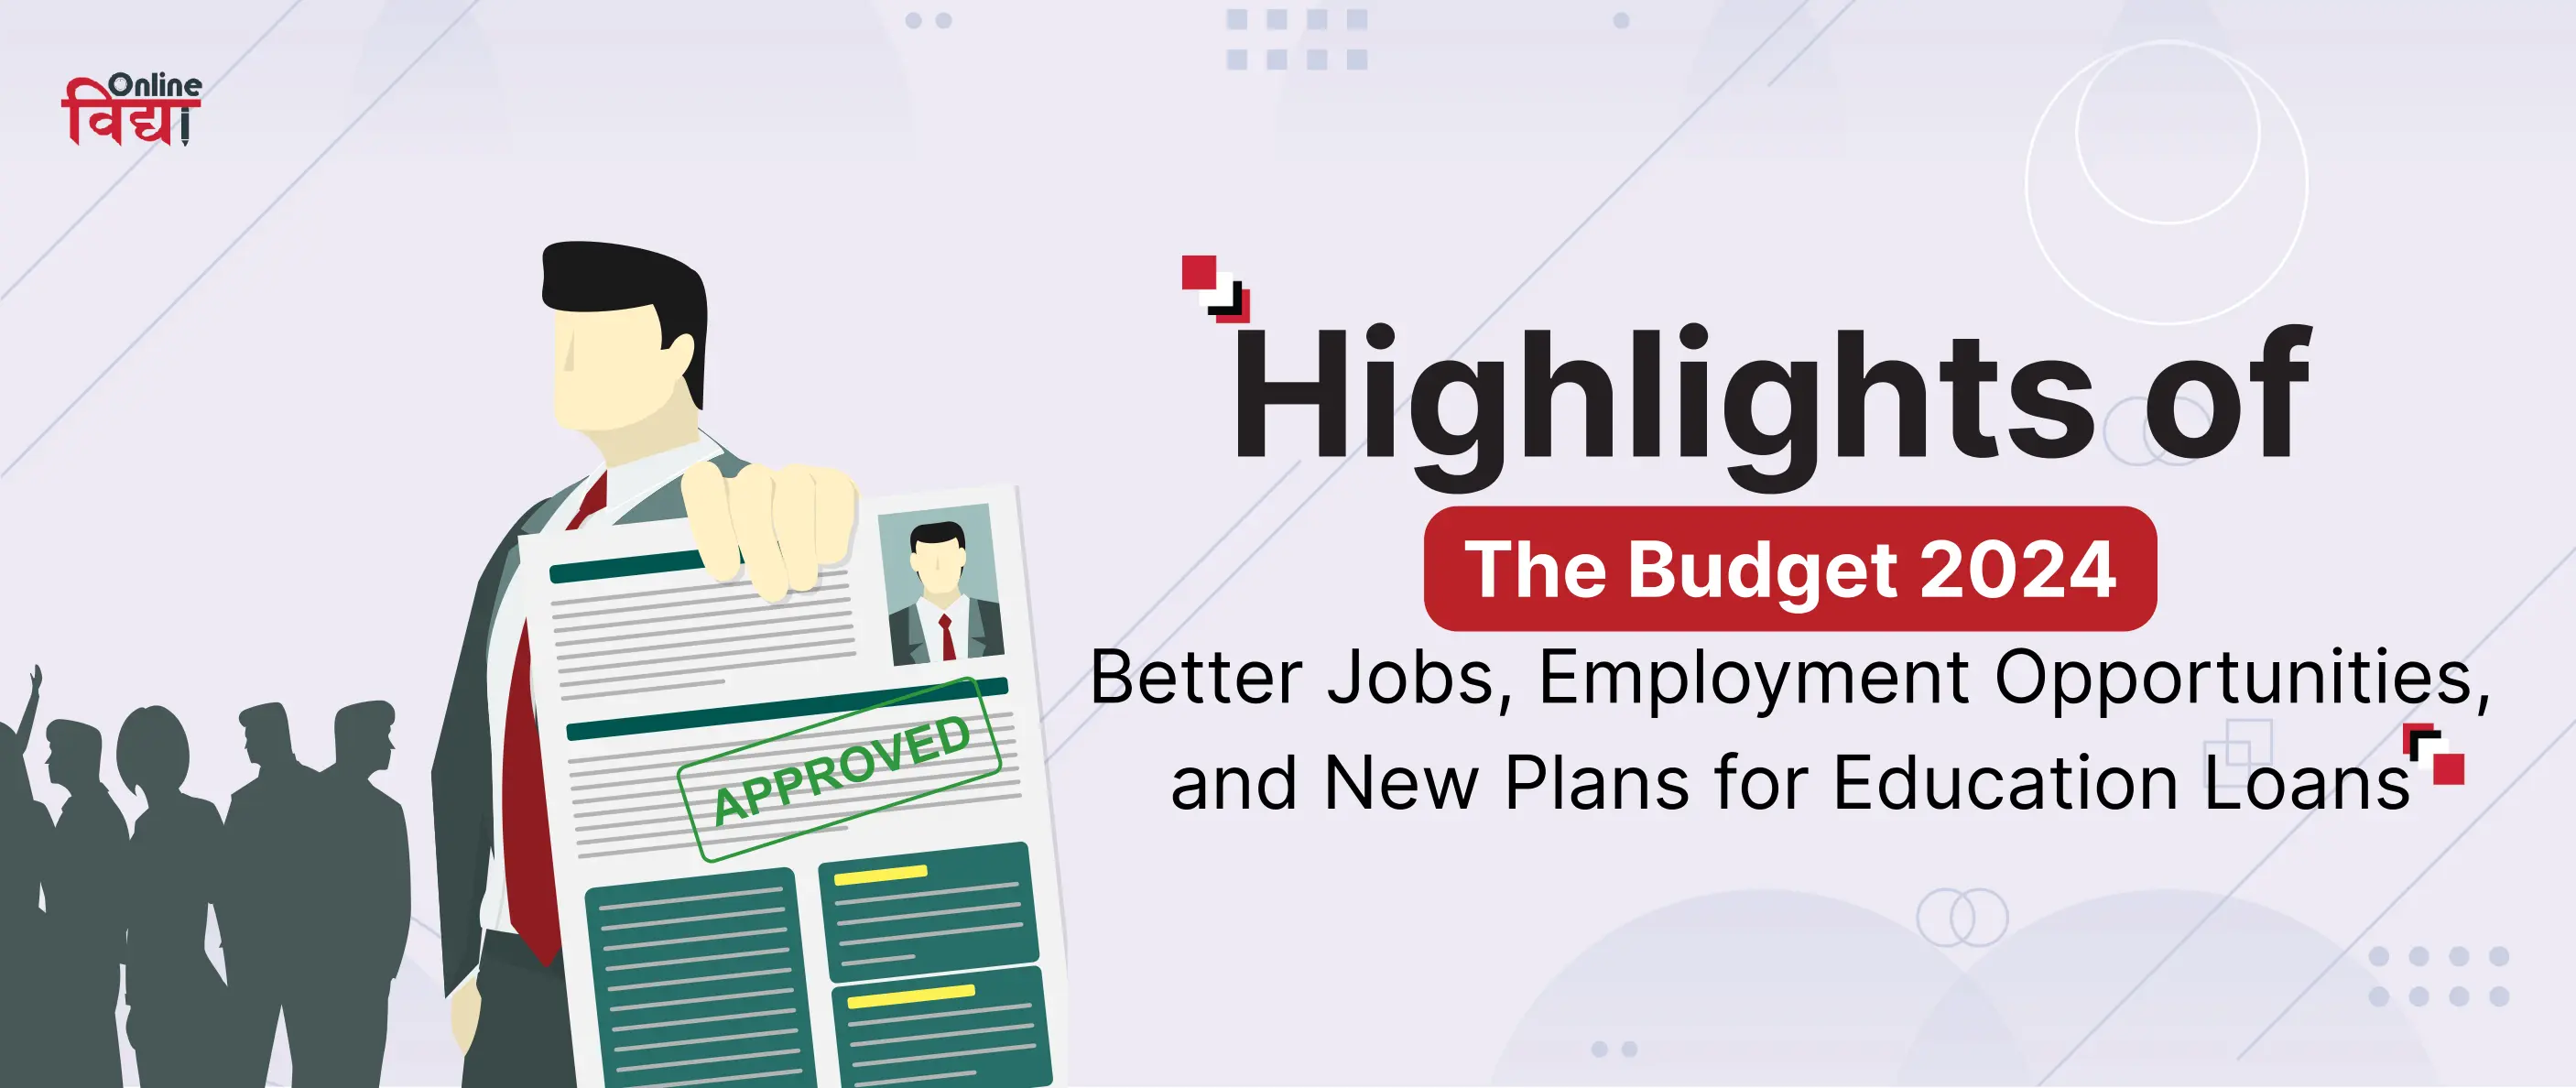 Highlights of the Budget 2024: Better Jobs, Employment Opportunities, and New Plans for Education Loans